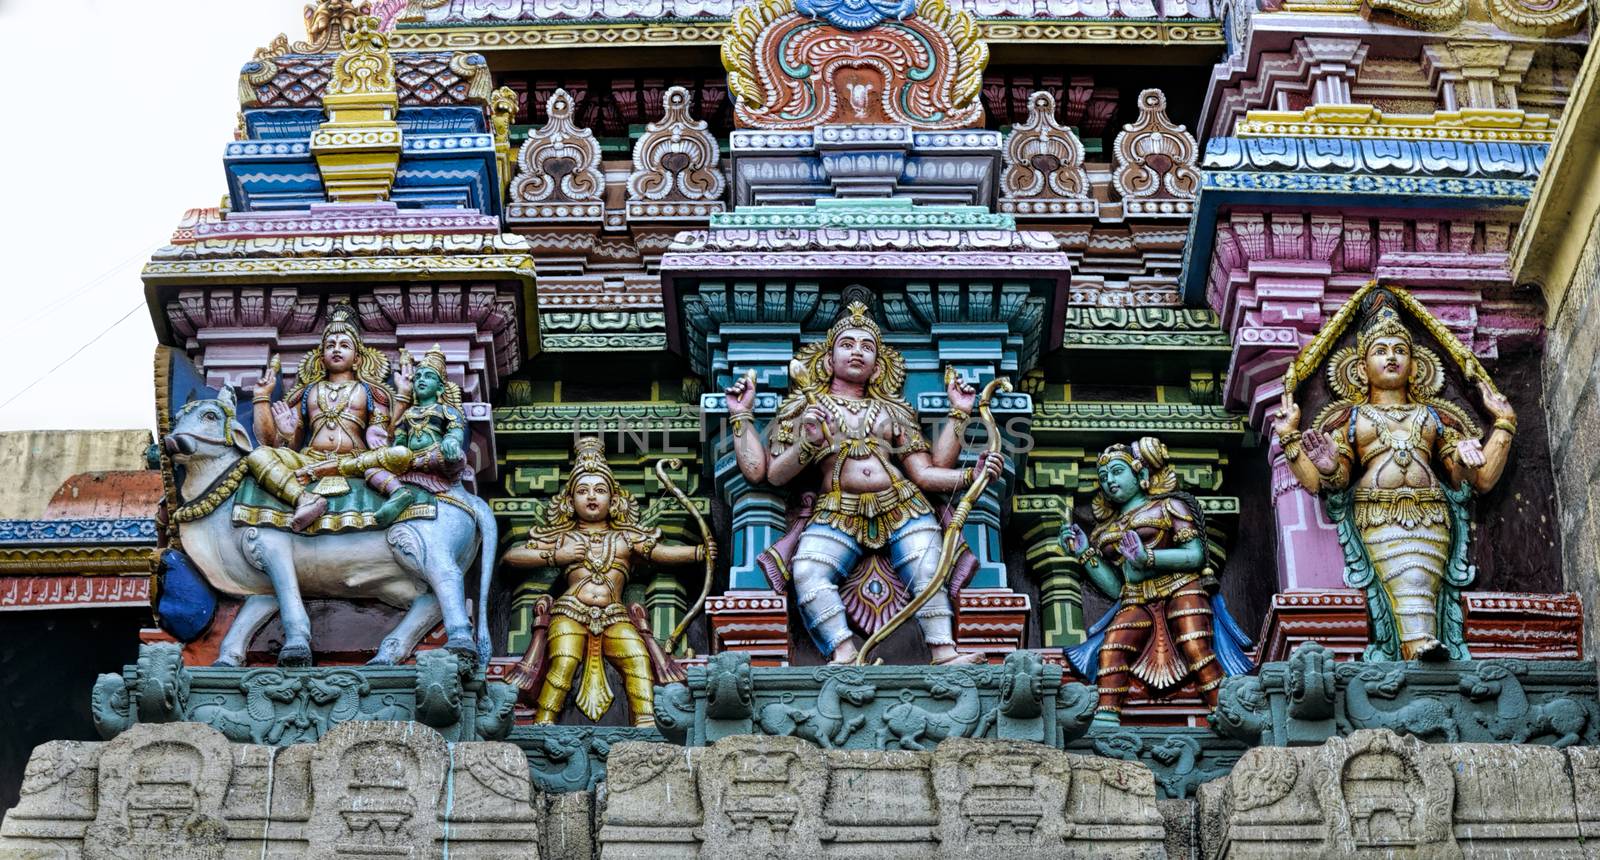 Detail of colorful tower of Meenakshi Amman Temple in India